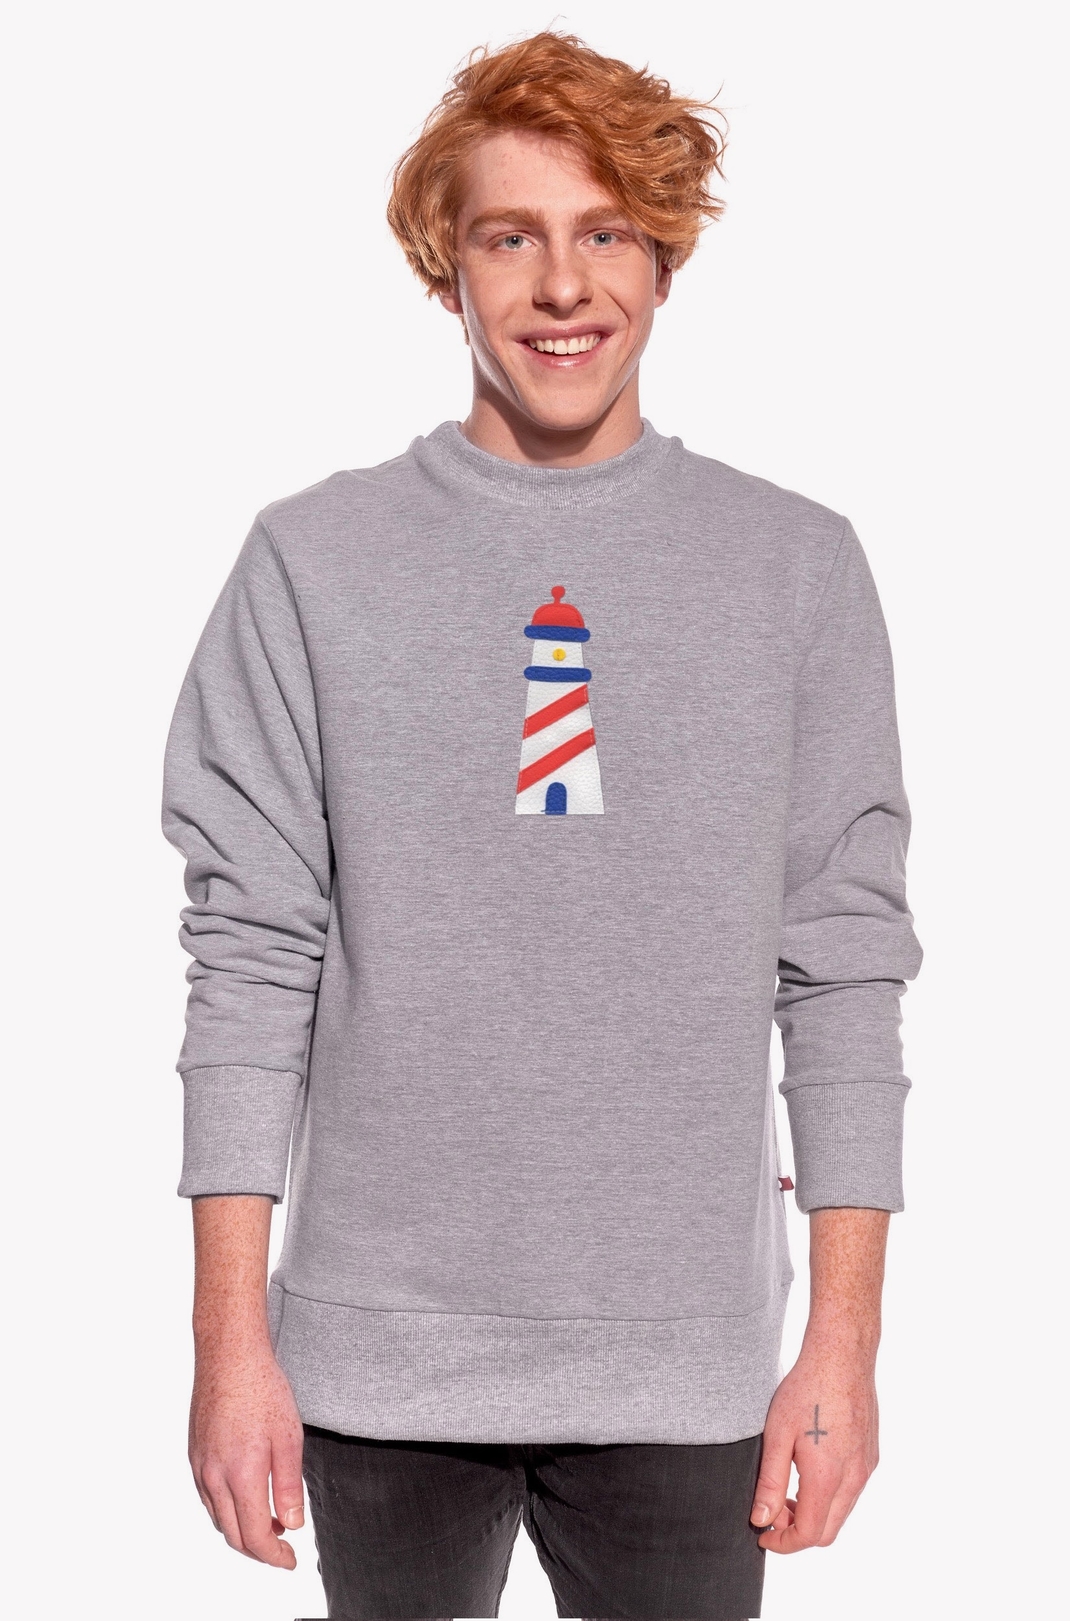 Hoodie with lighthouse